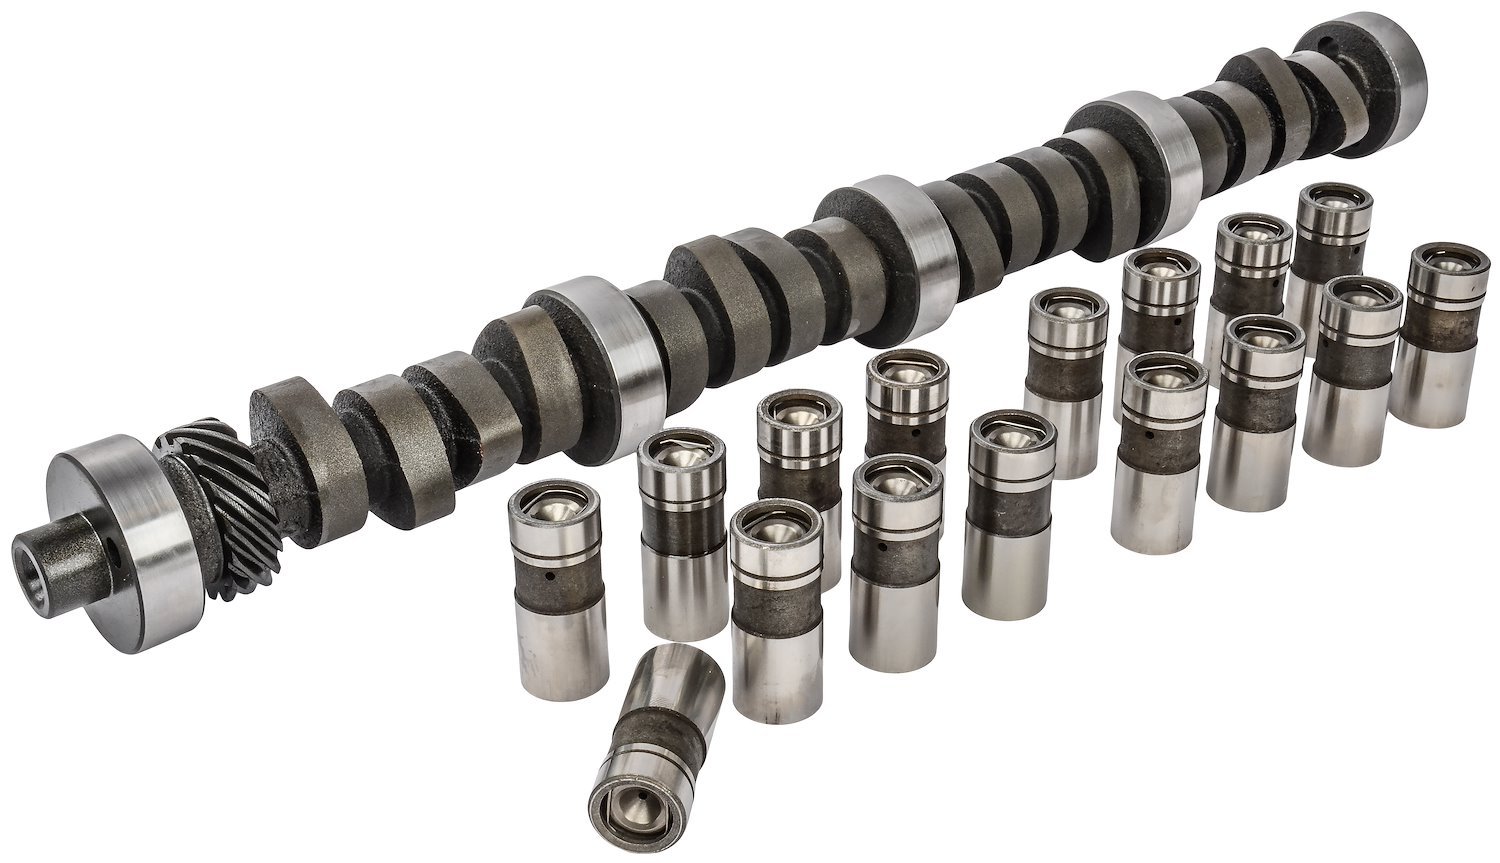 Hydraulic Flat Tappet Camshaft & Lifters for Chrysler: 1964-Up 273-340-360 and 1967-Up 318